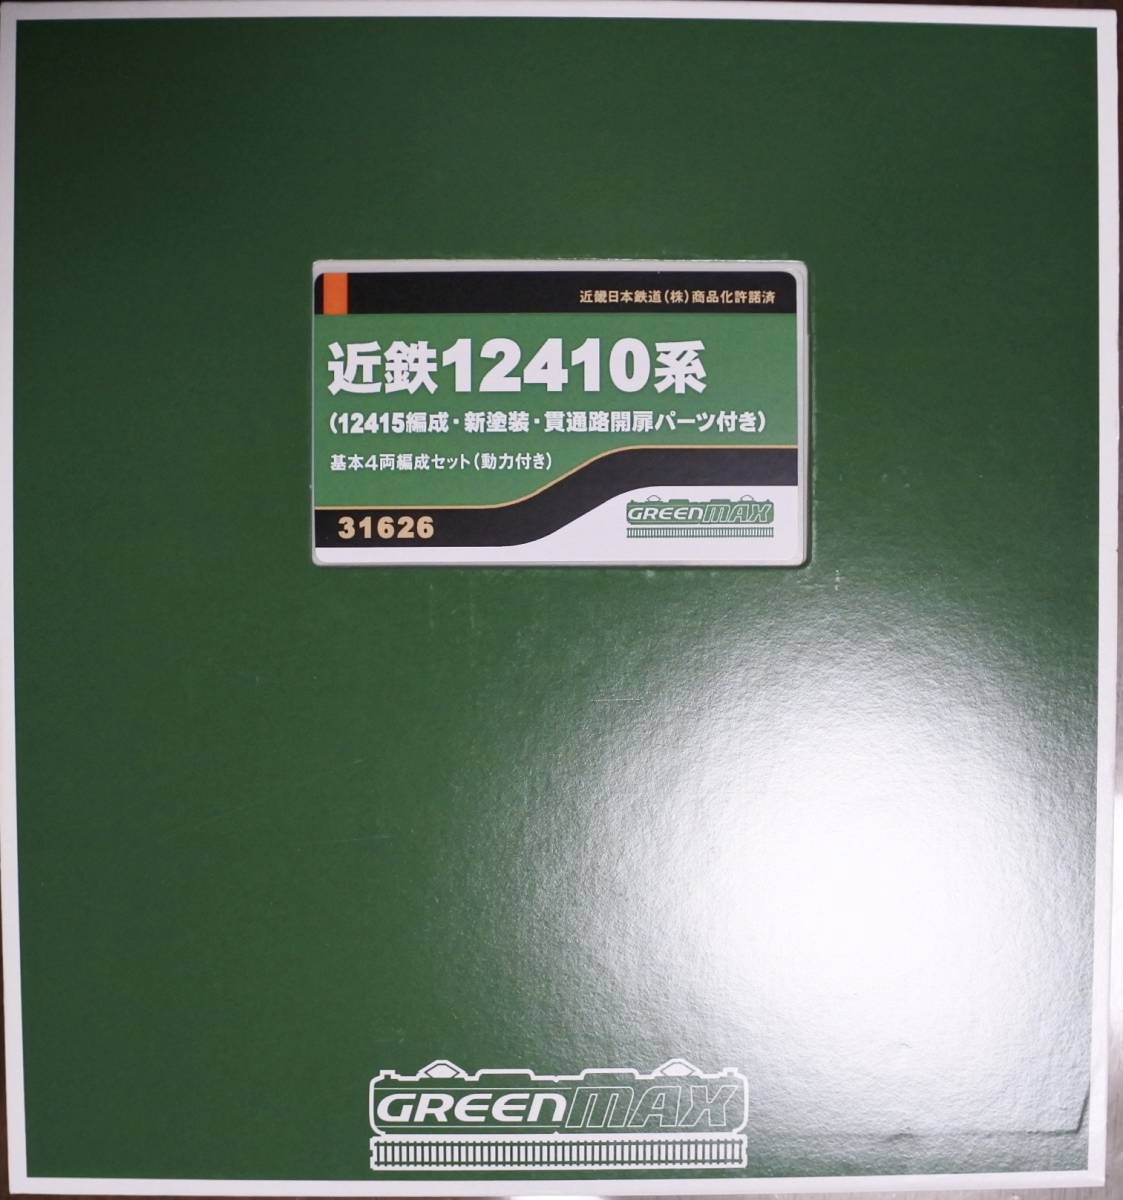  green Max 31626 close iron 12410 series 12415 compilation . basis 4 both compilation . set ( power car attaching )* new goods unrunning *